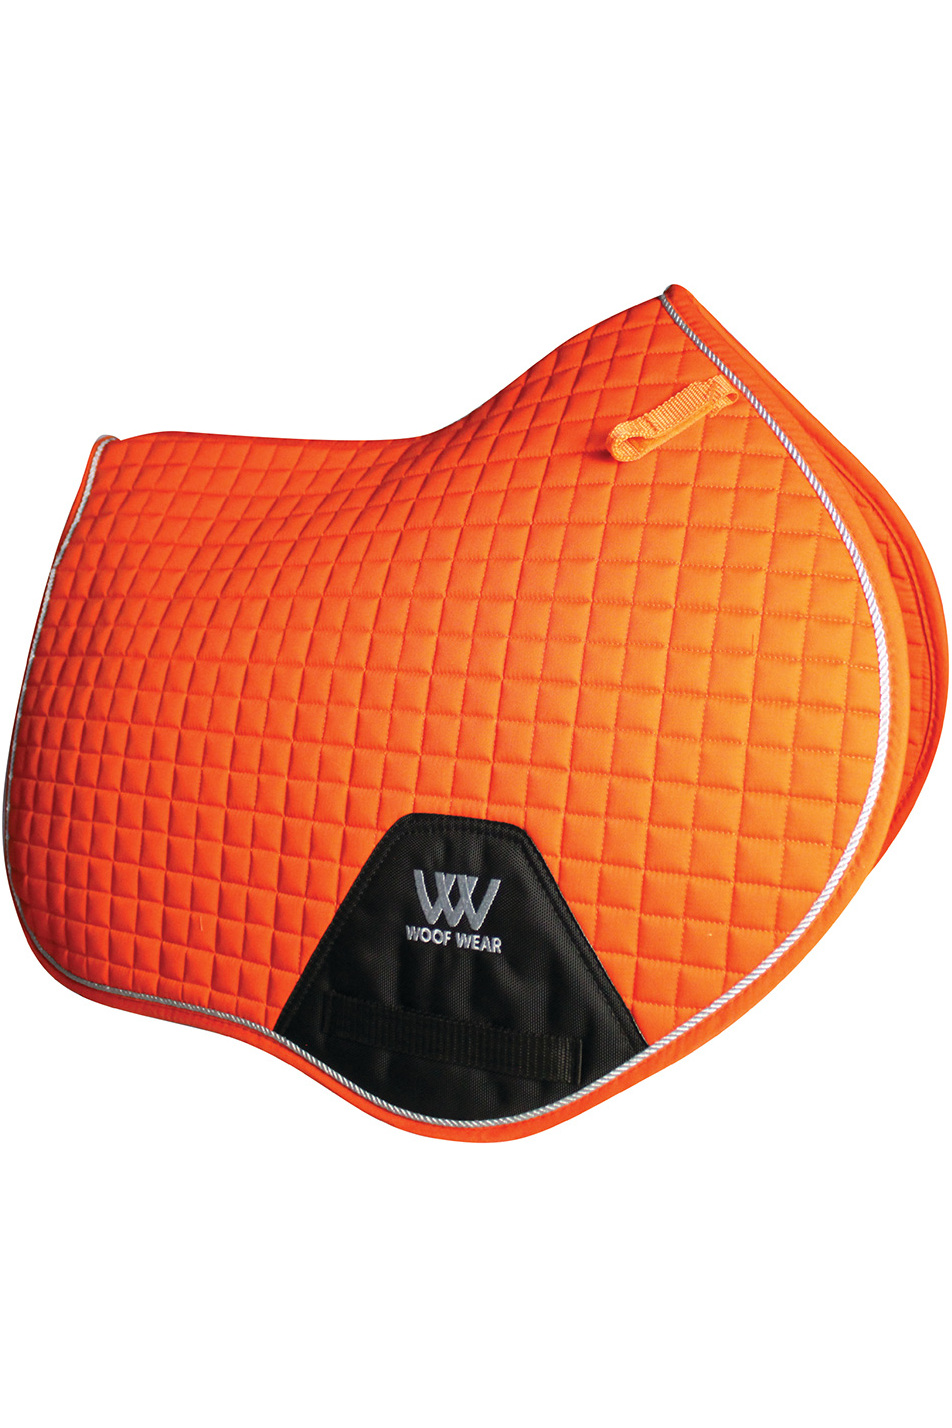 WOOF WEAR CLOSE CONTACT SADDLE CLOTH NUMNAH QUILTED PAD 